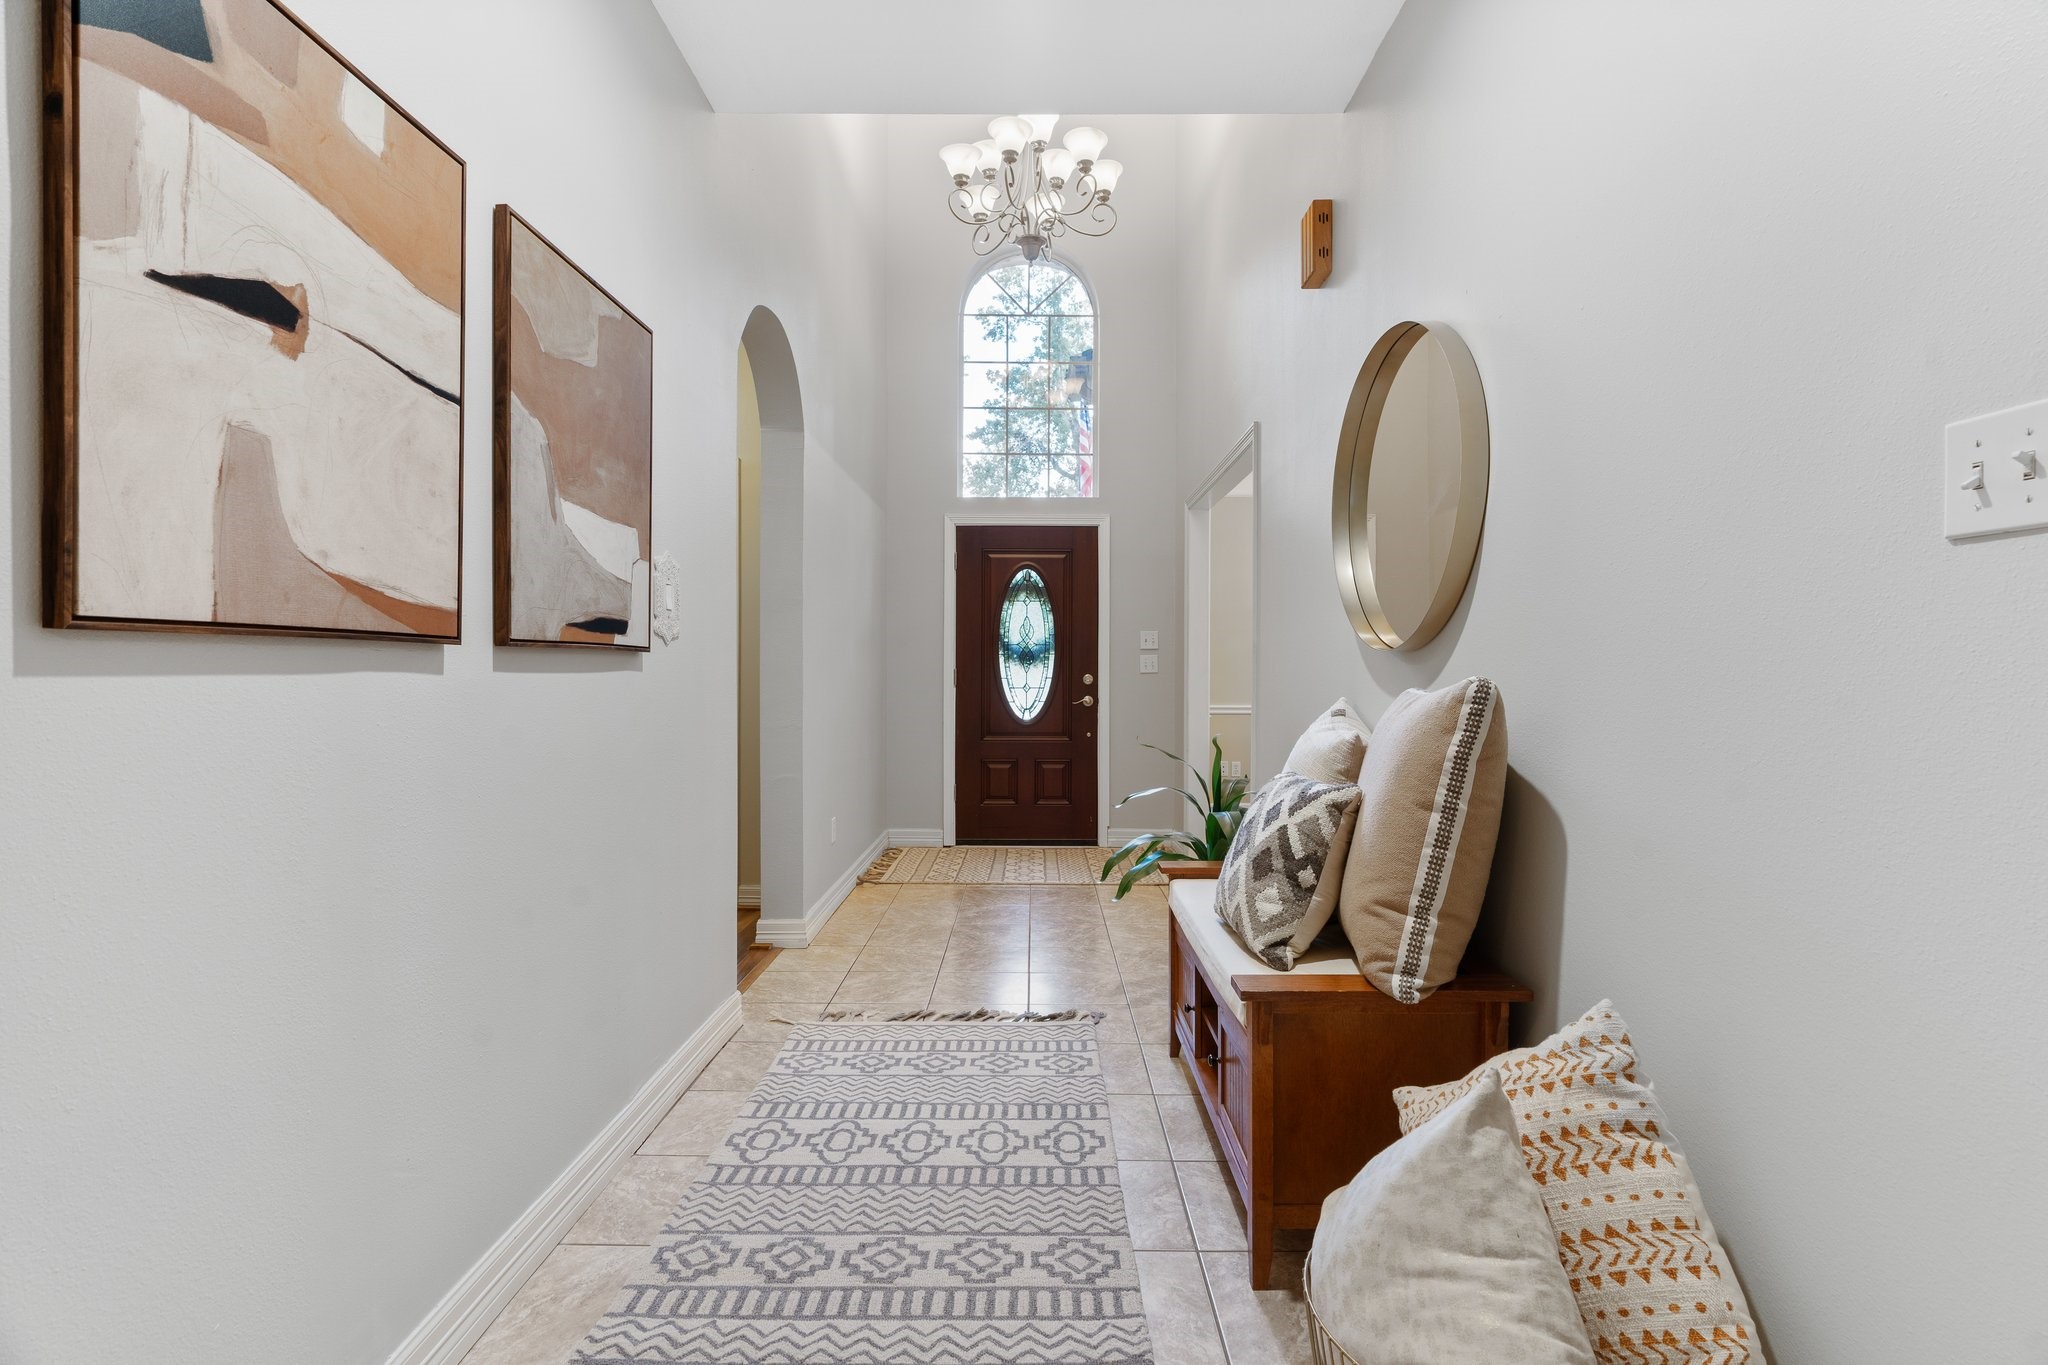 Sunny, inviting entry to the main house sets the tone of this charming home